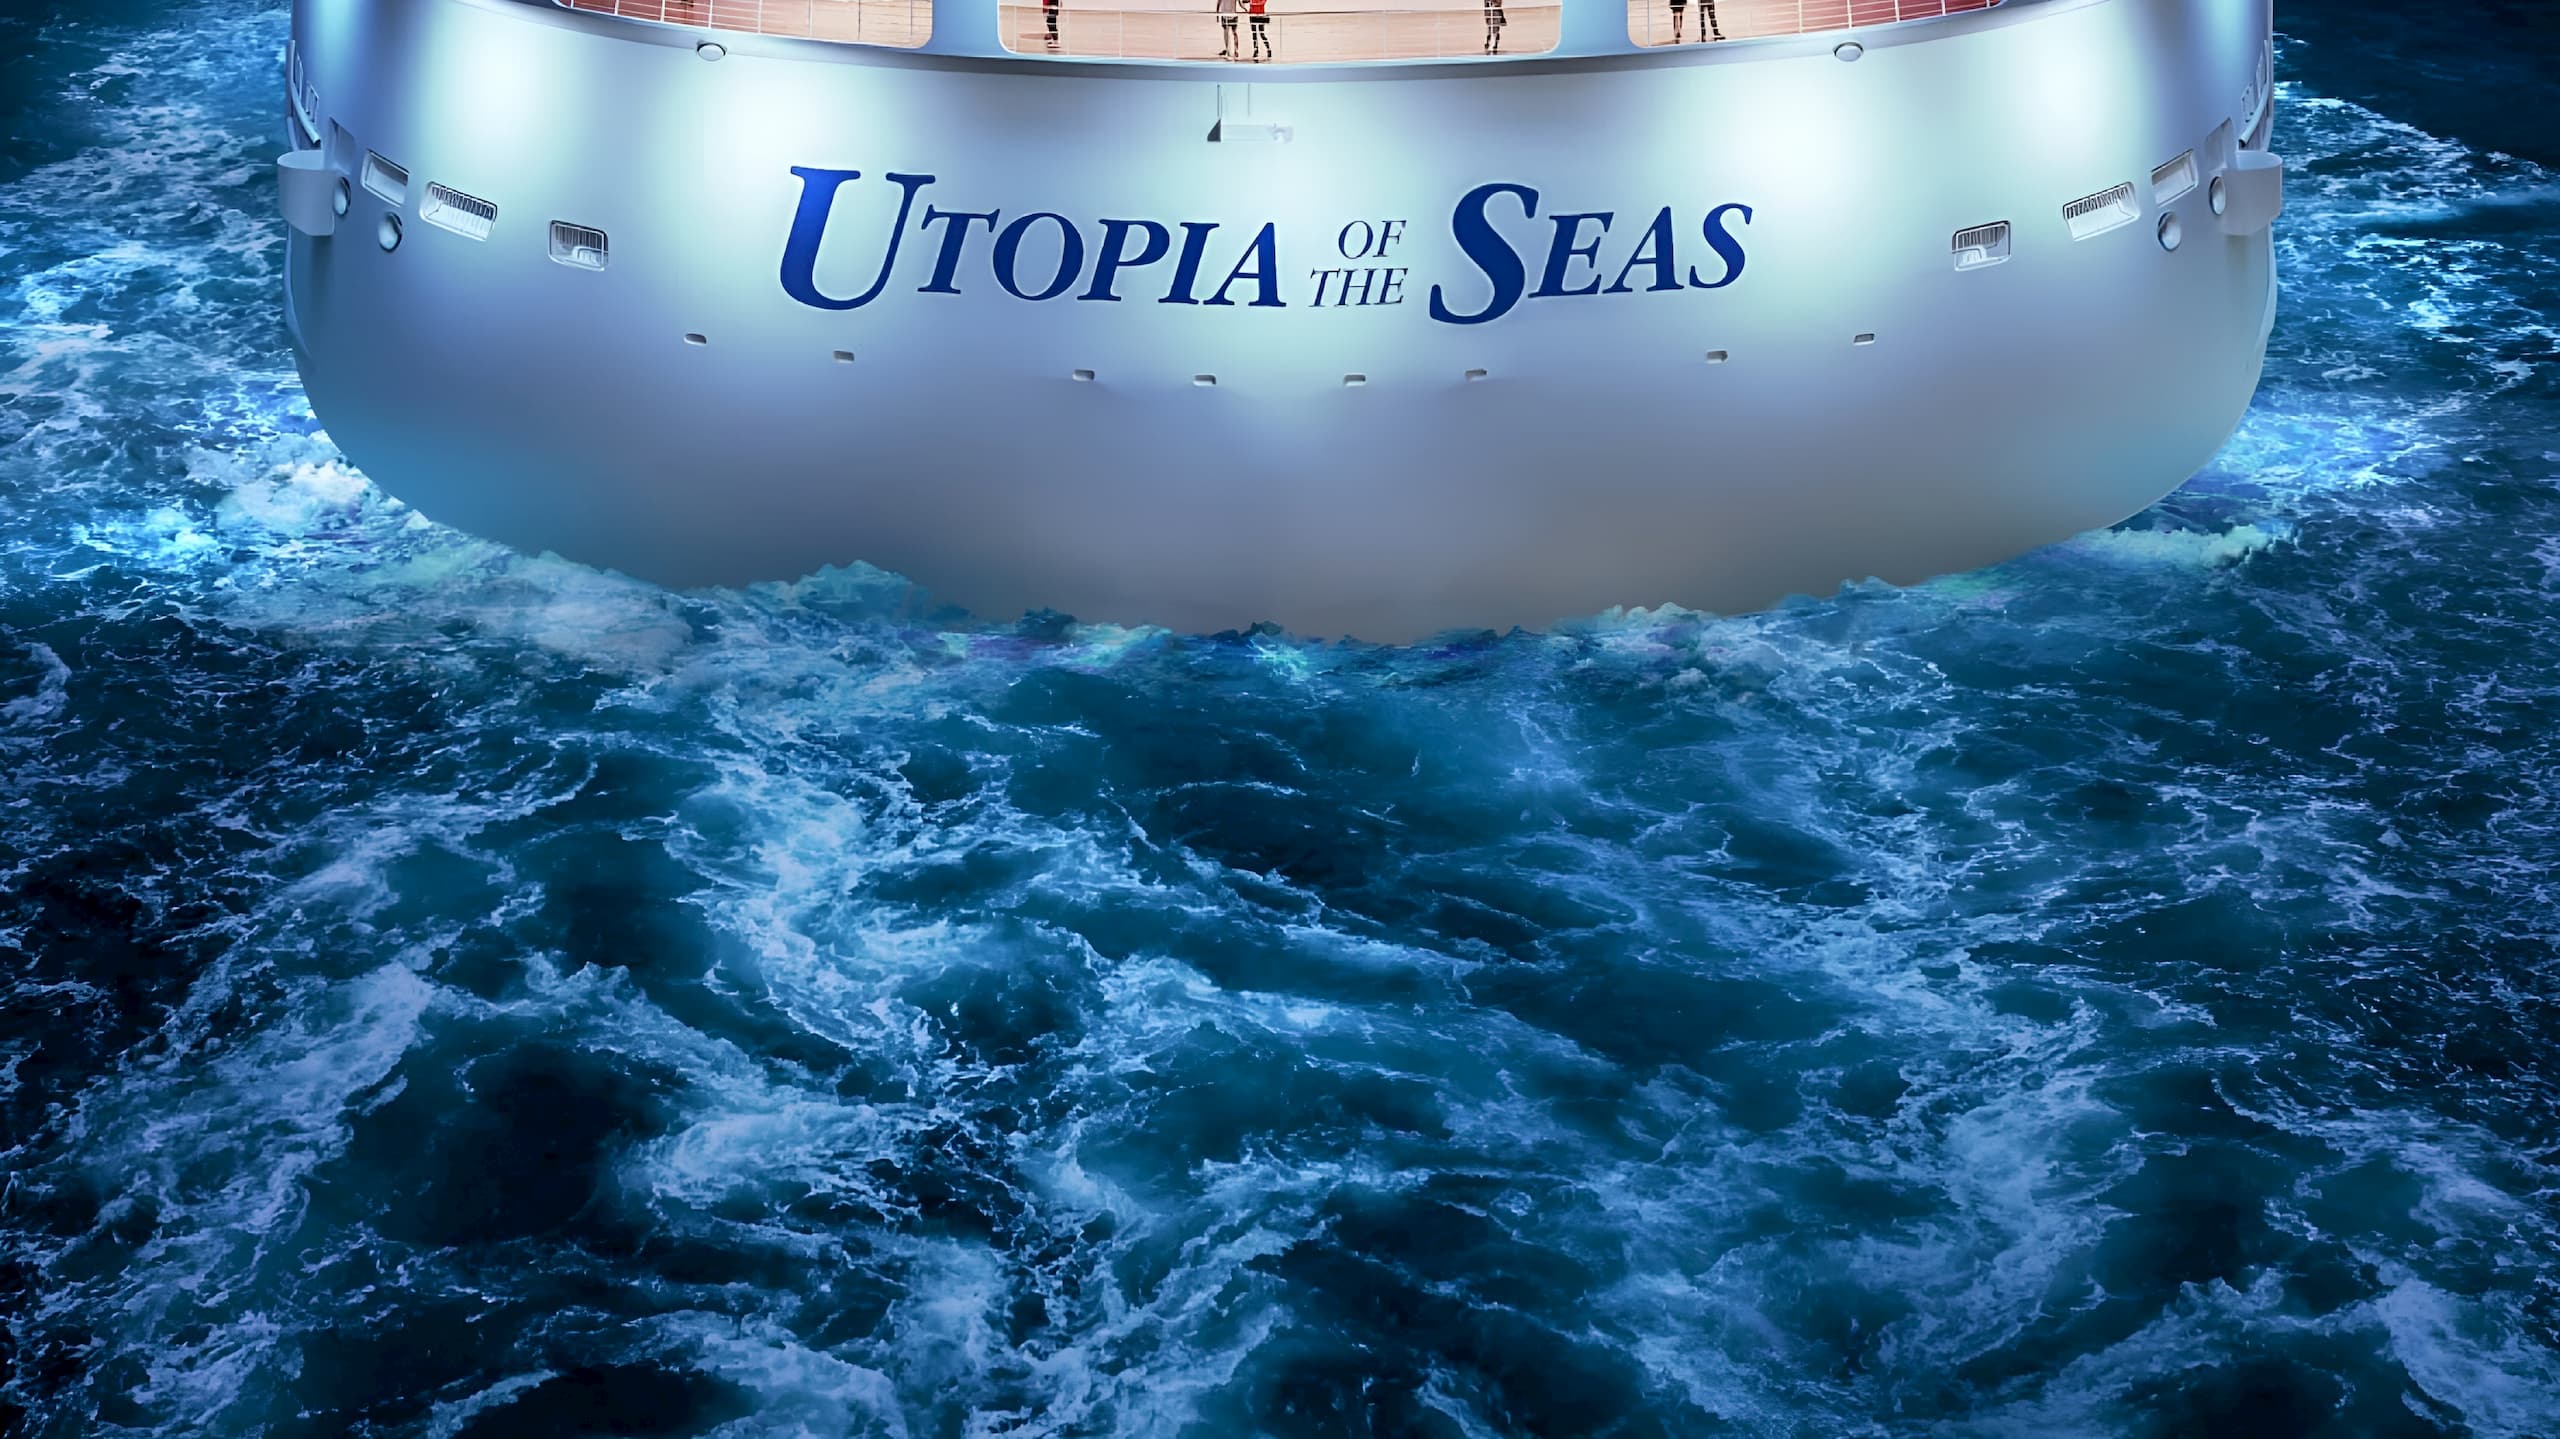 The back of a ship sailing through the water with the name Utopia of the Seas written across it. Utopia of the Seas.